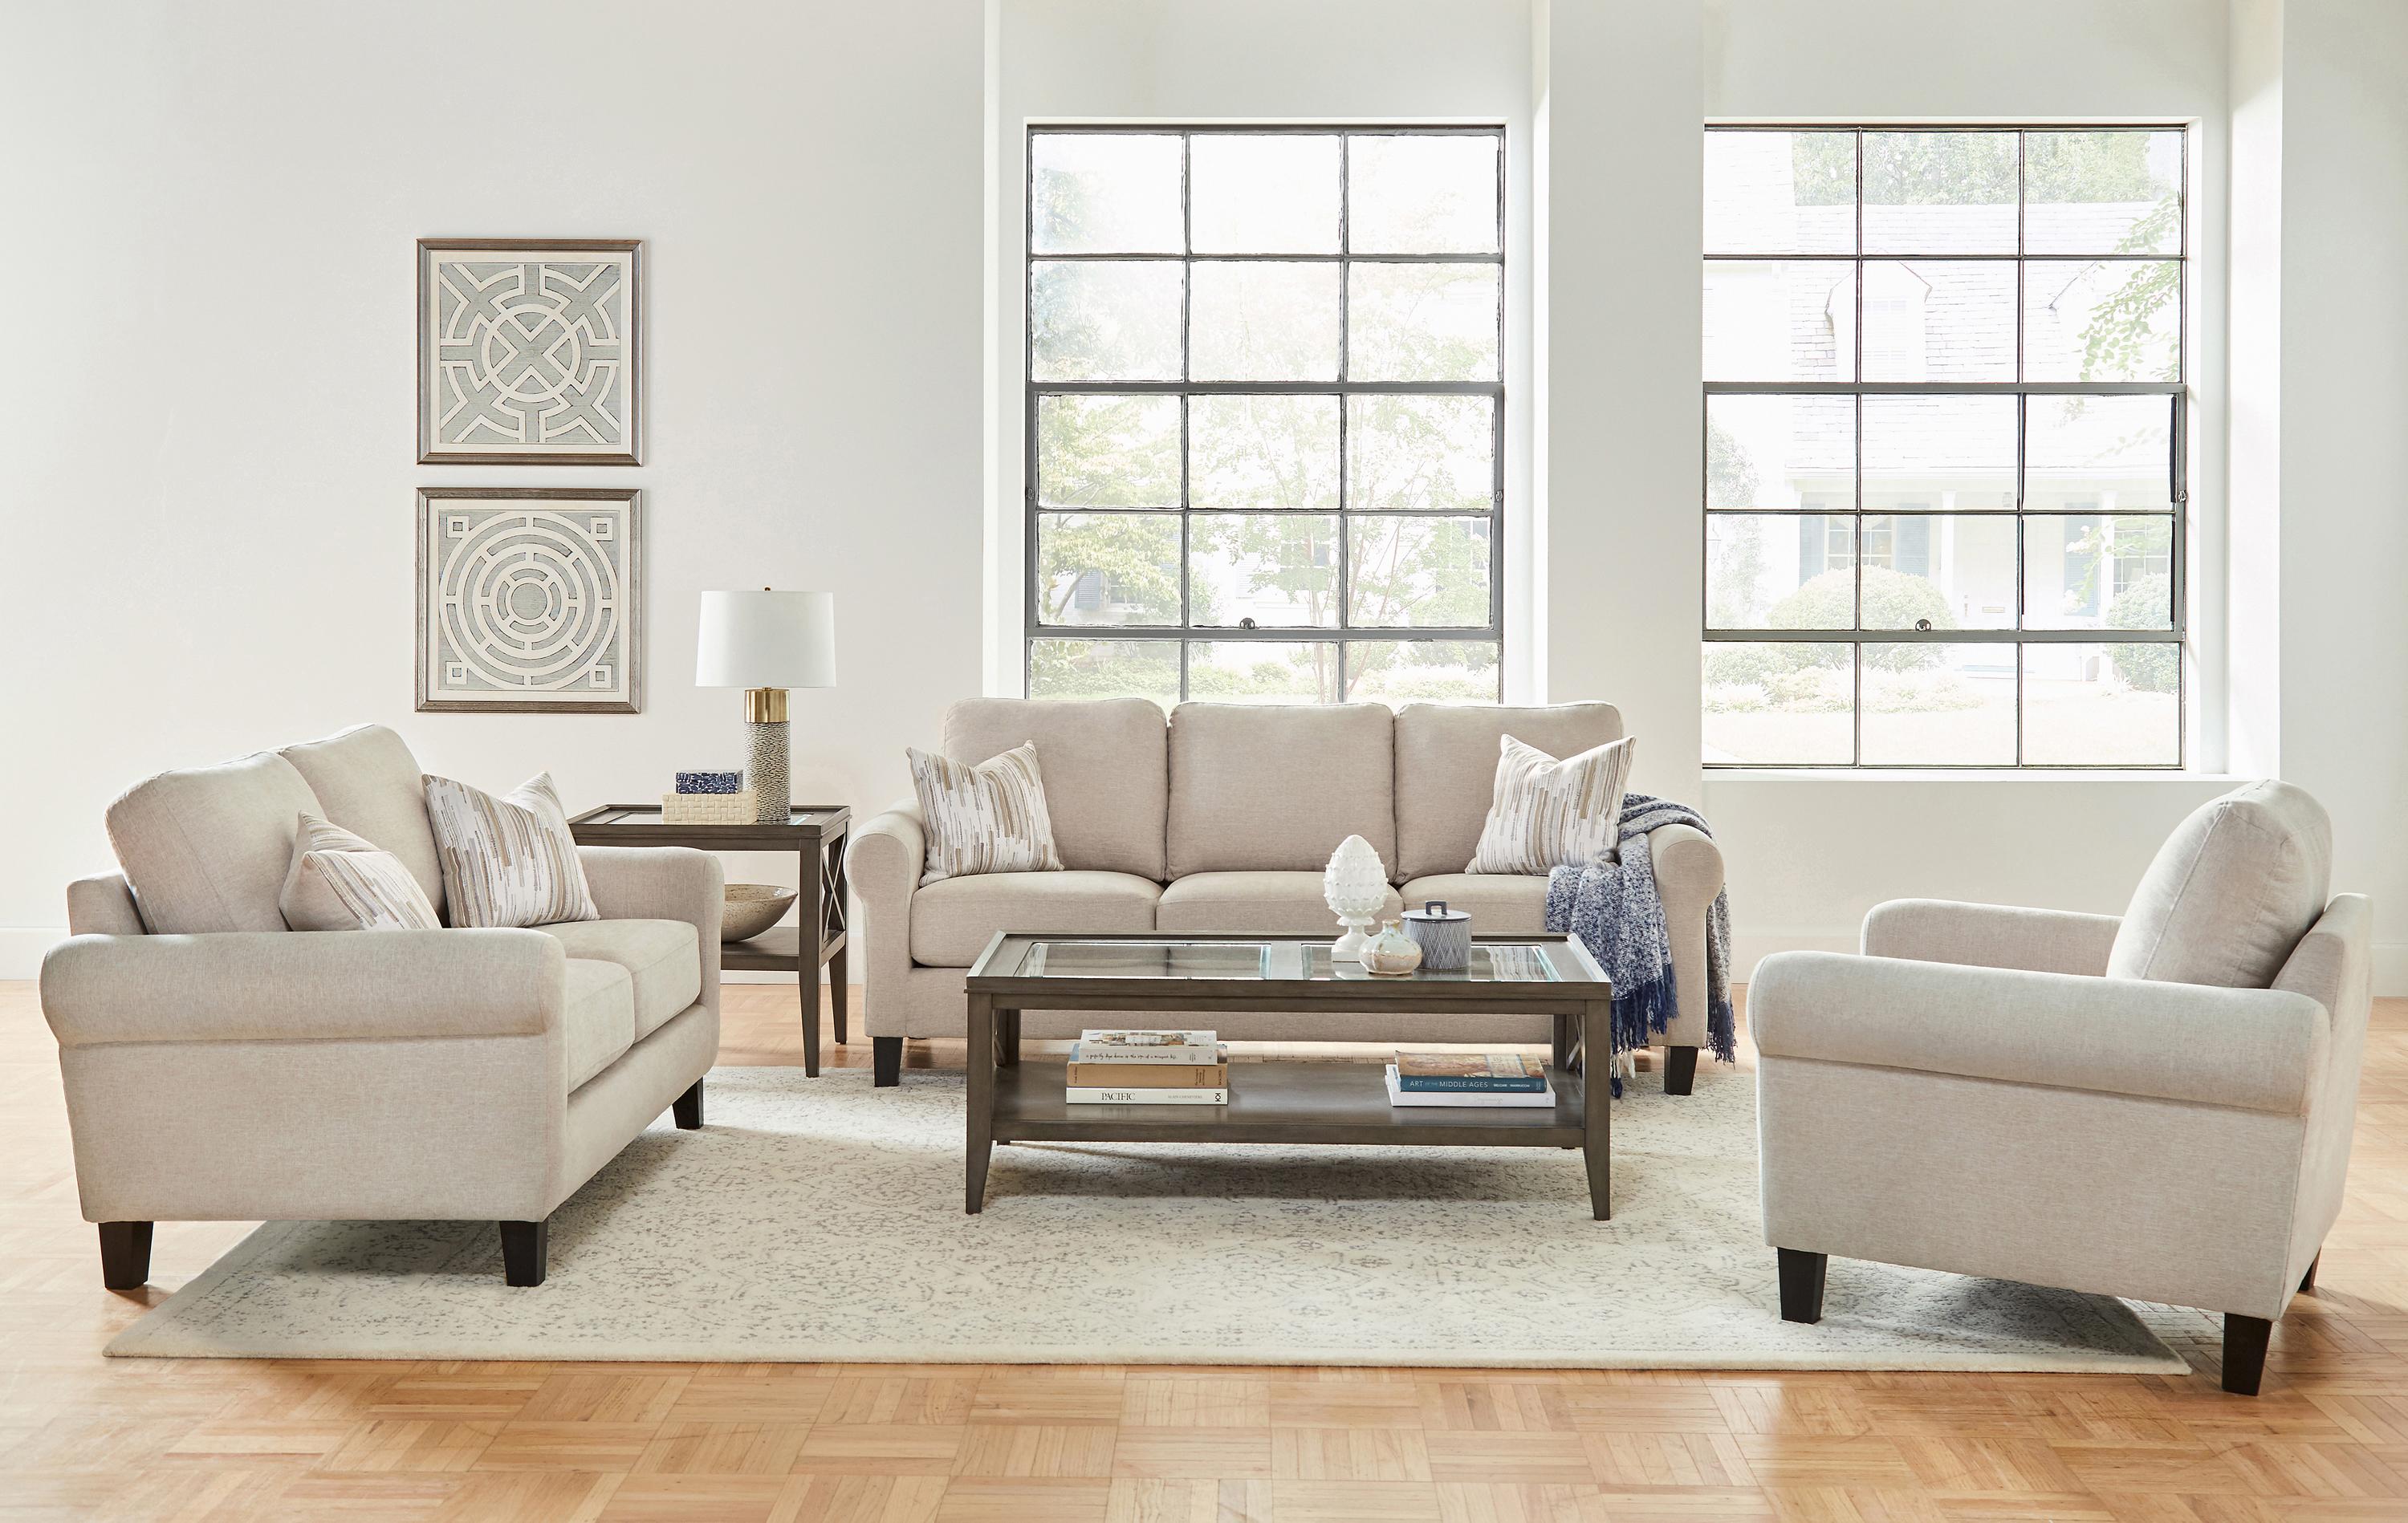 Transitional Living Room Set 509781-S3 Nadine 509781-S3 in Oatmeal Chenille